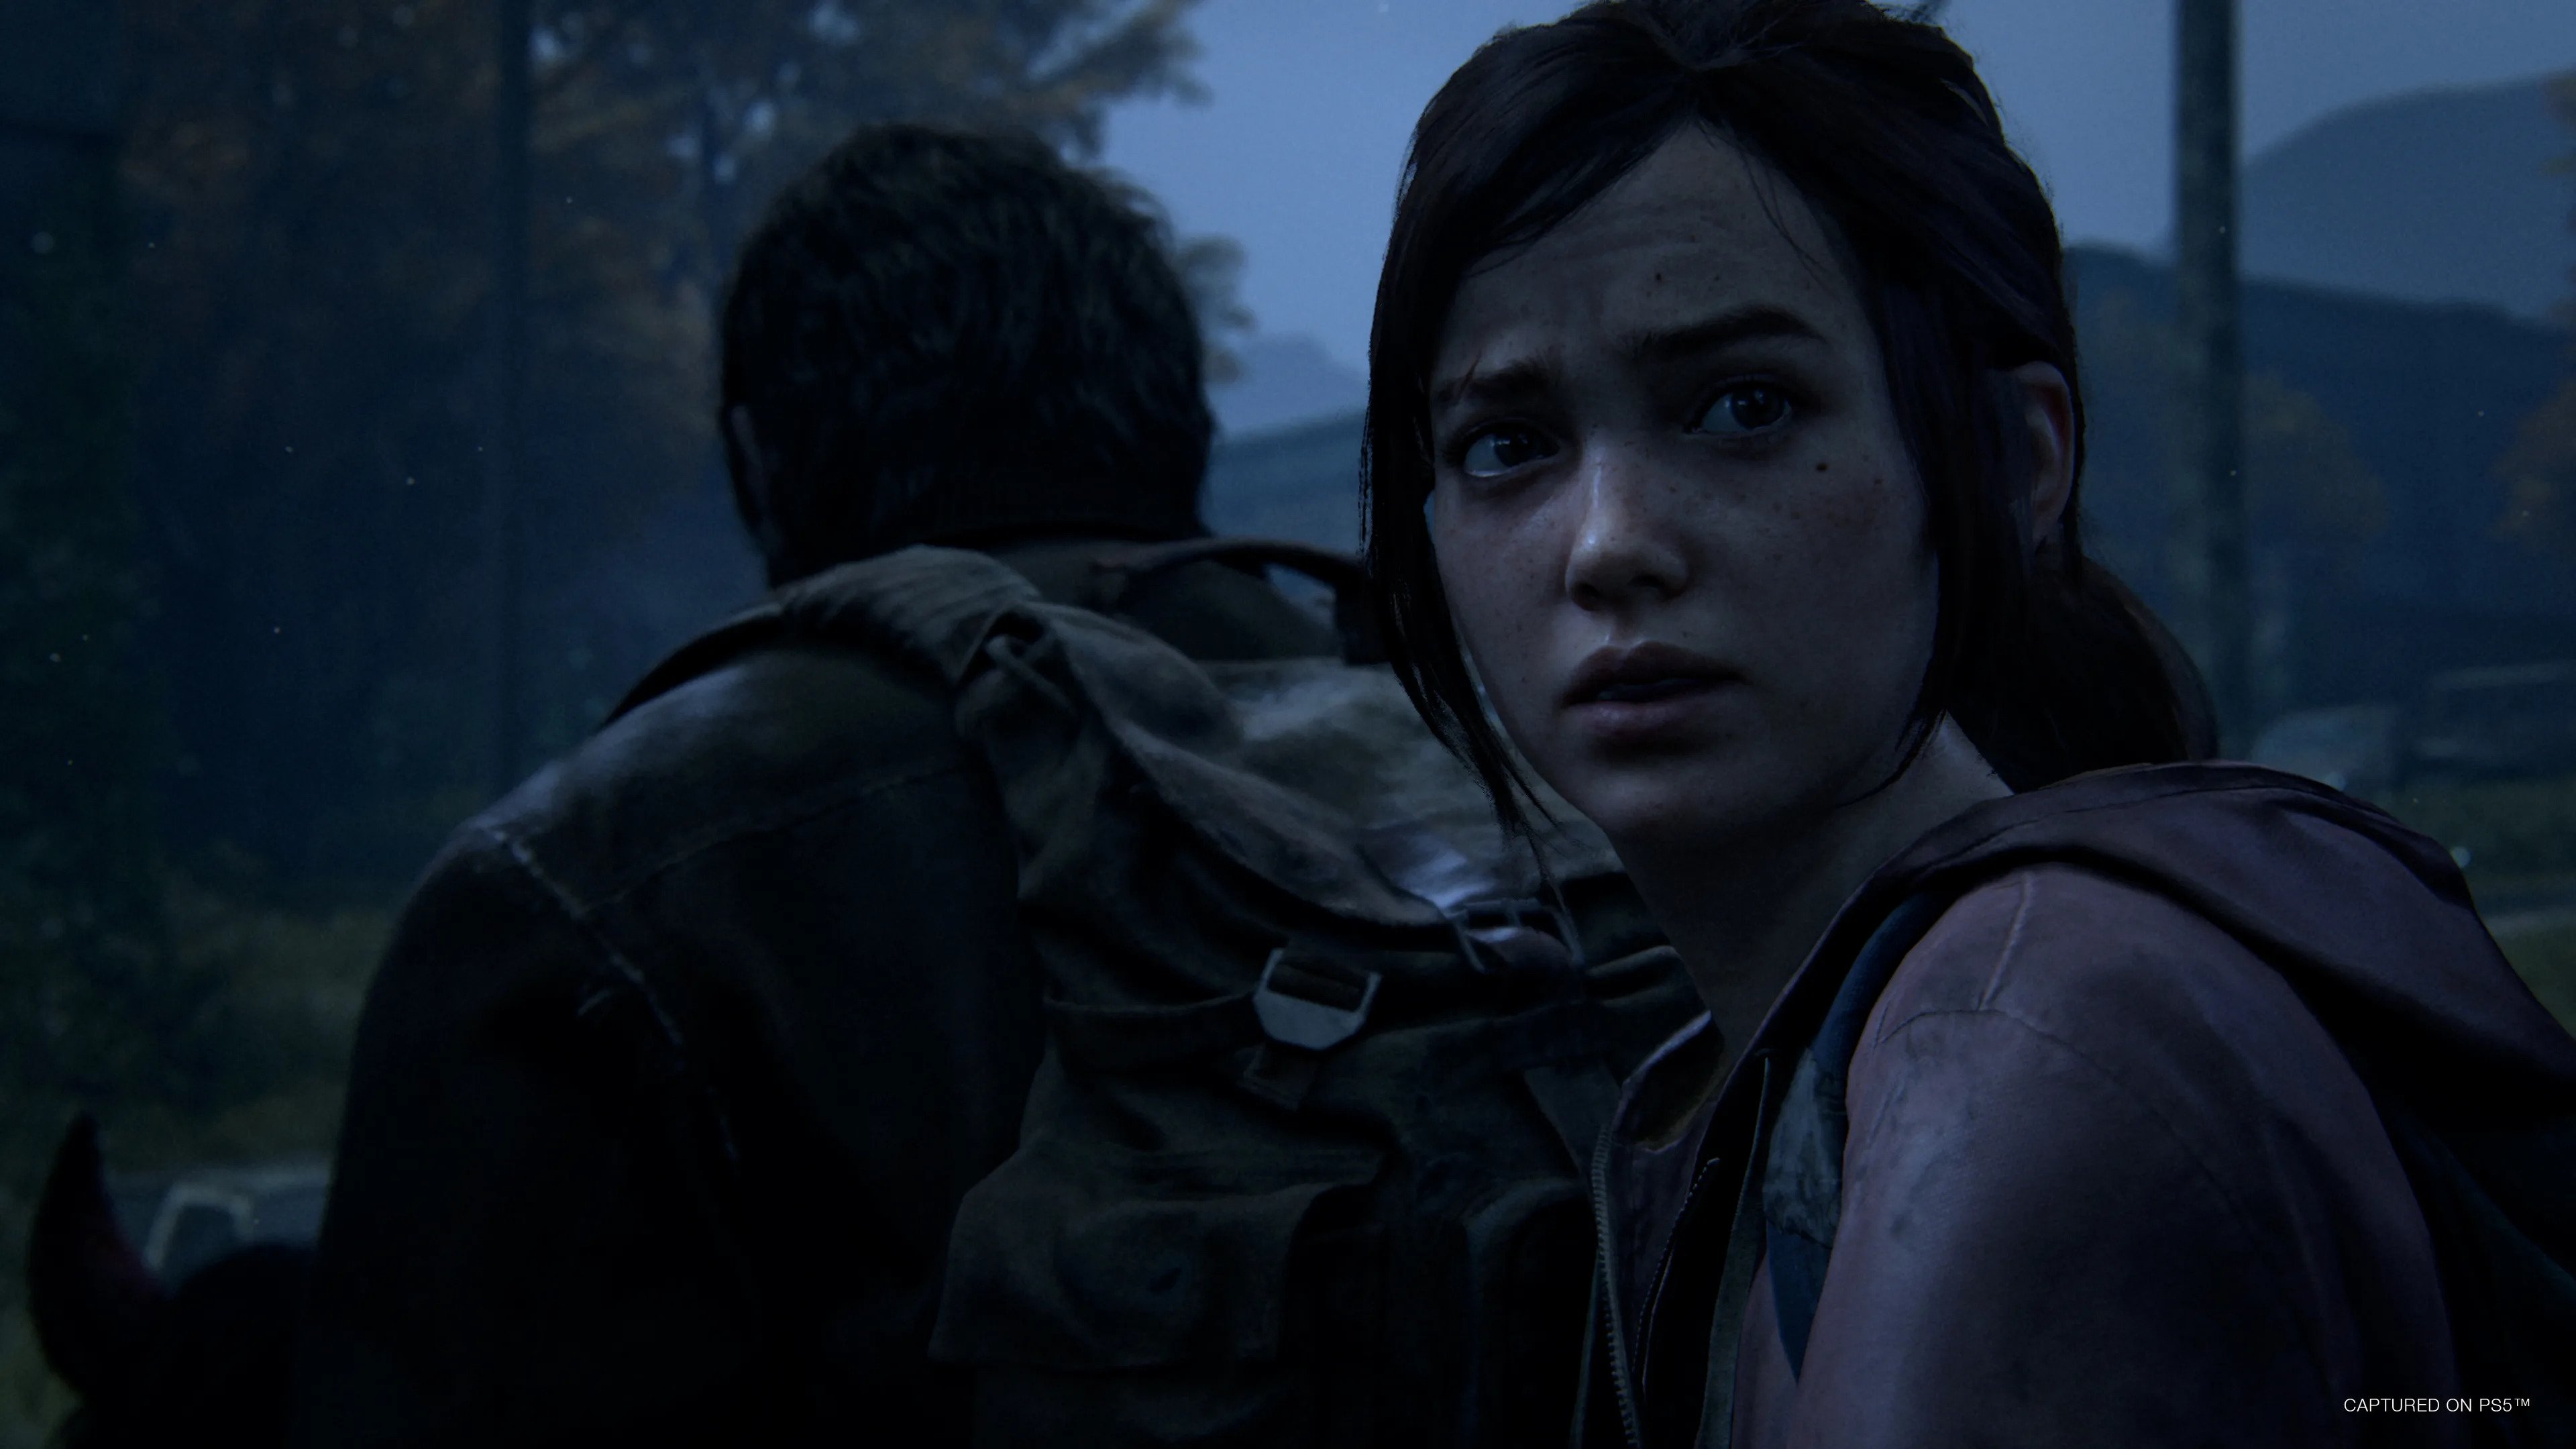 The Last of Us Remake is Coming to PS5 and PC